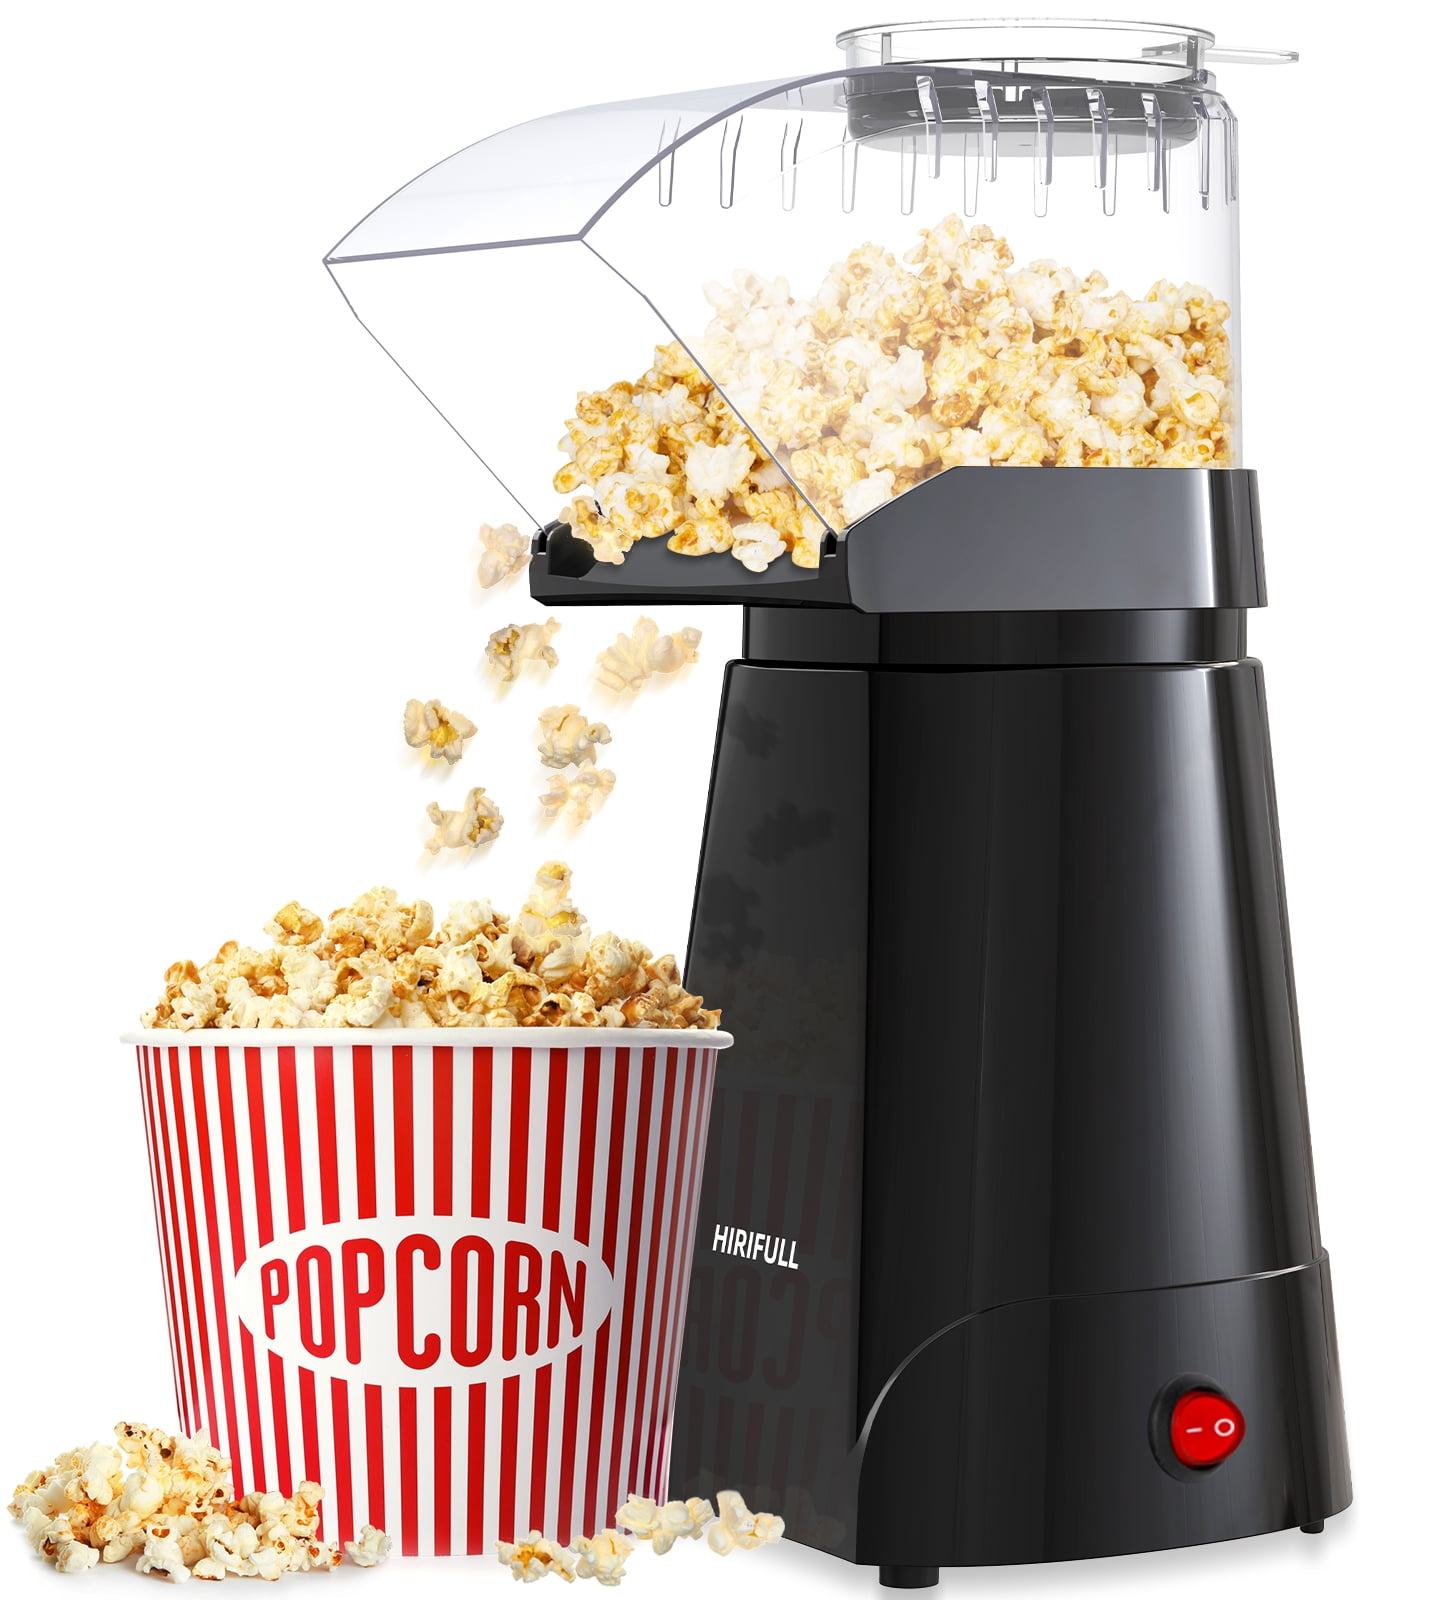 Clearance！Popcorn Machine, Hot Air Popcorn, Air-Pop Popcorn,Fully Automatic Popcorn  Machine,Fast Popcorn Maker with Measuring Spoon, Quick Popcorn, Oil Free,  Good for Watching Party Movies Use Gift 